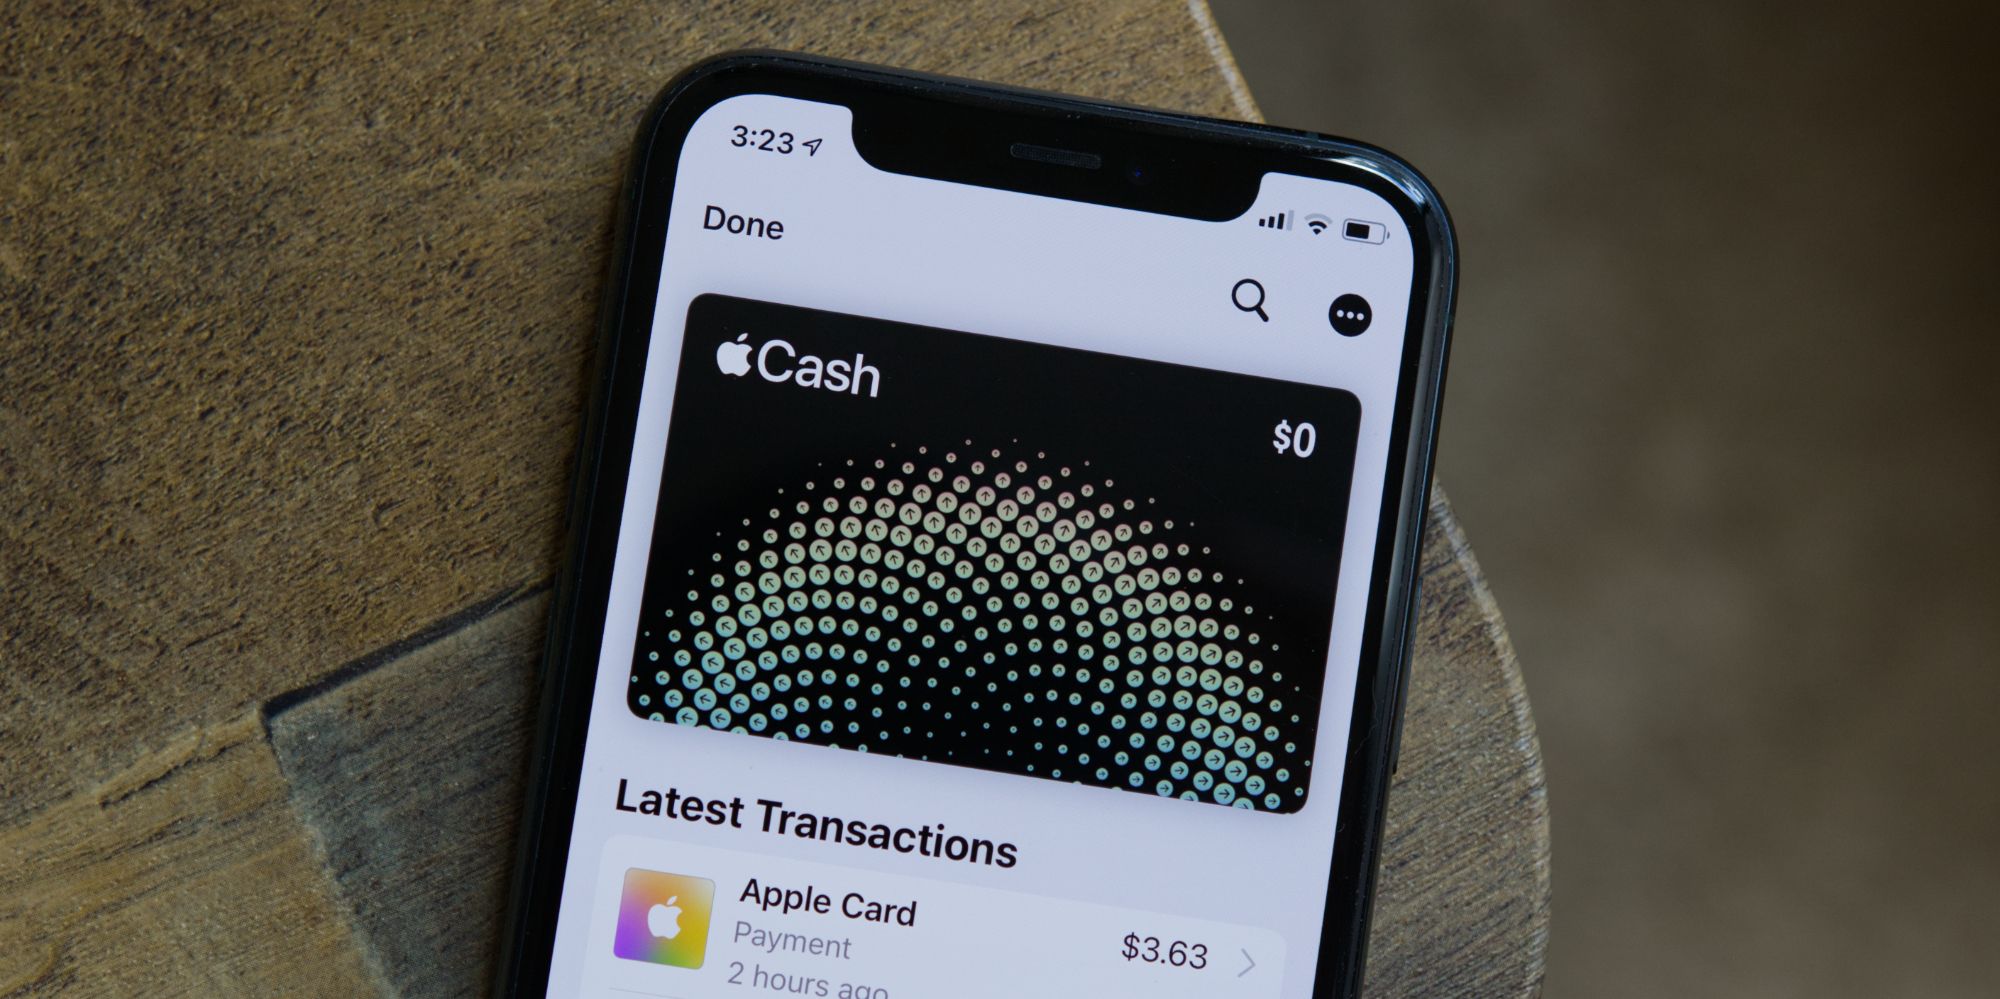 How To Transfer Apple Cash To Your Bank